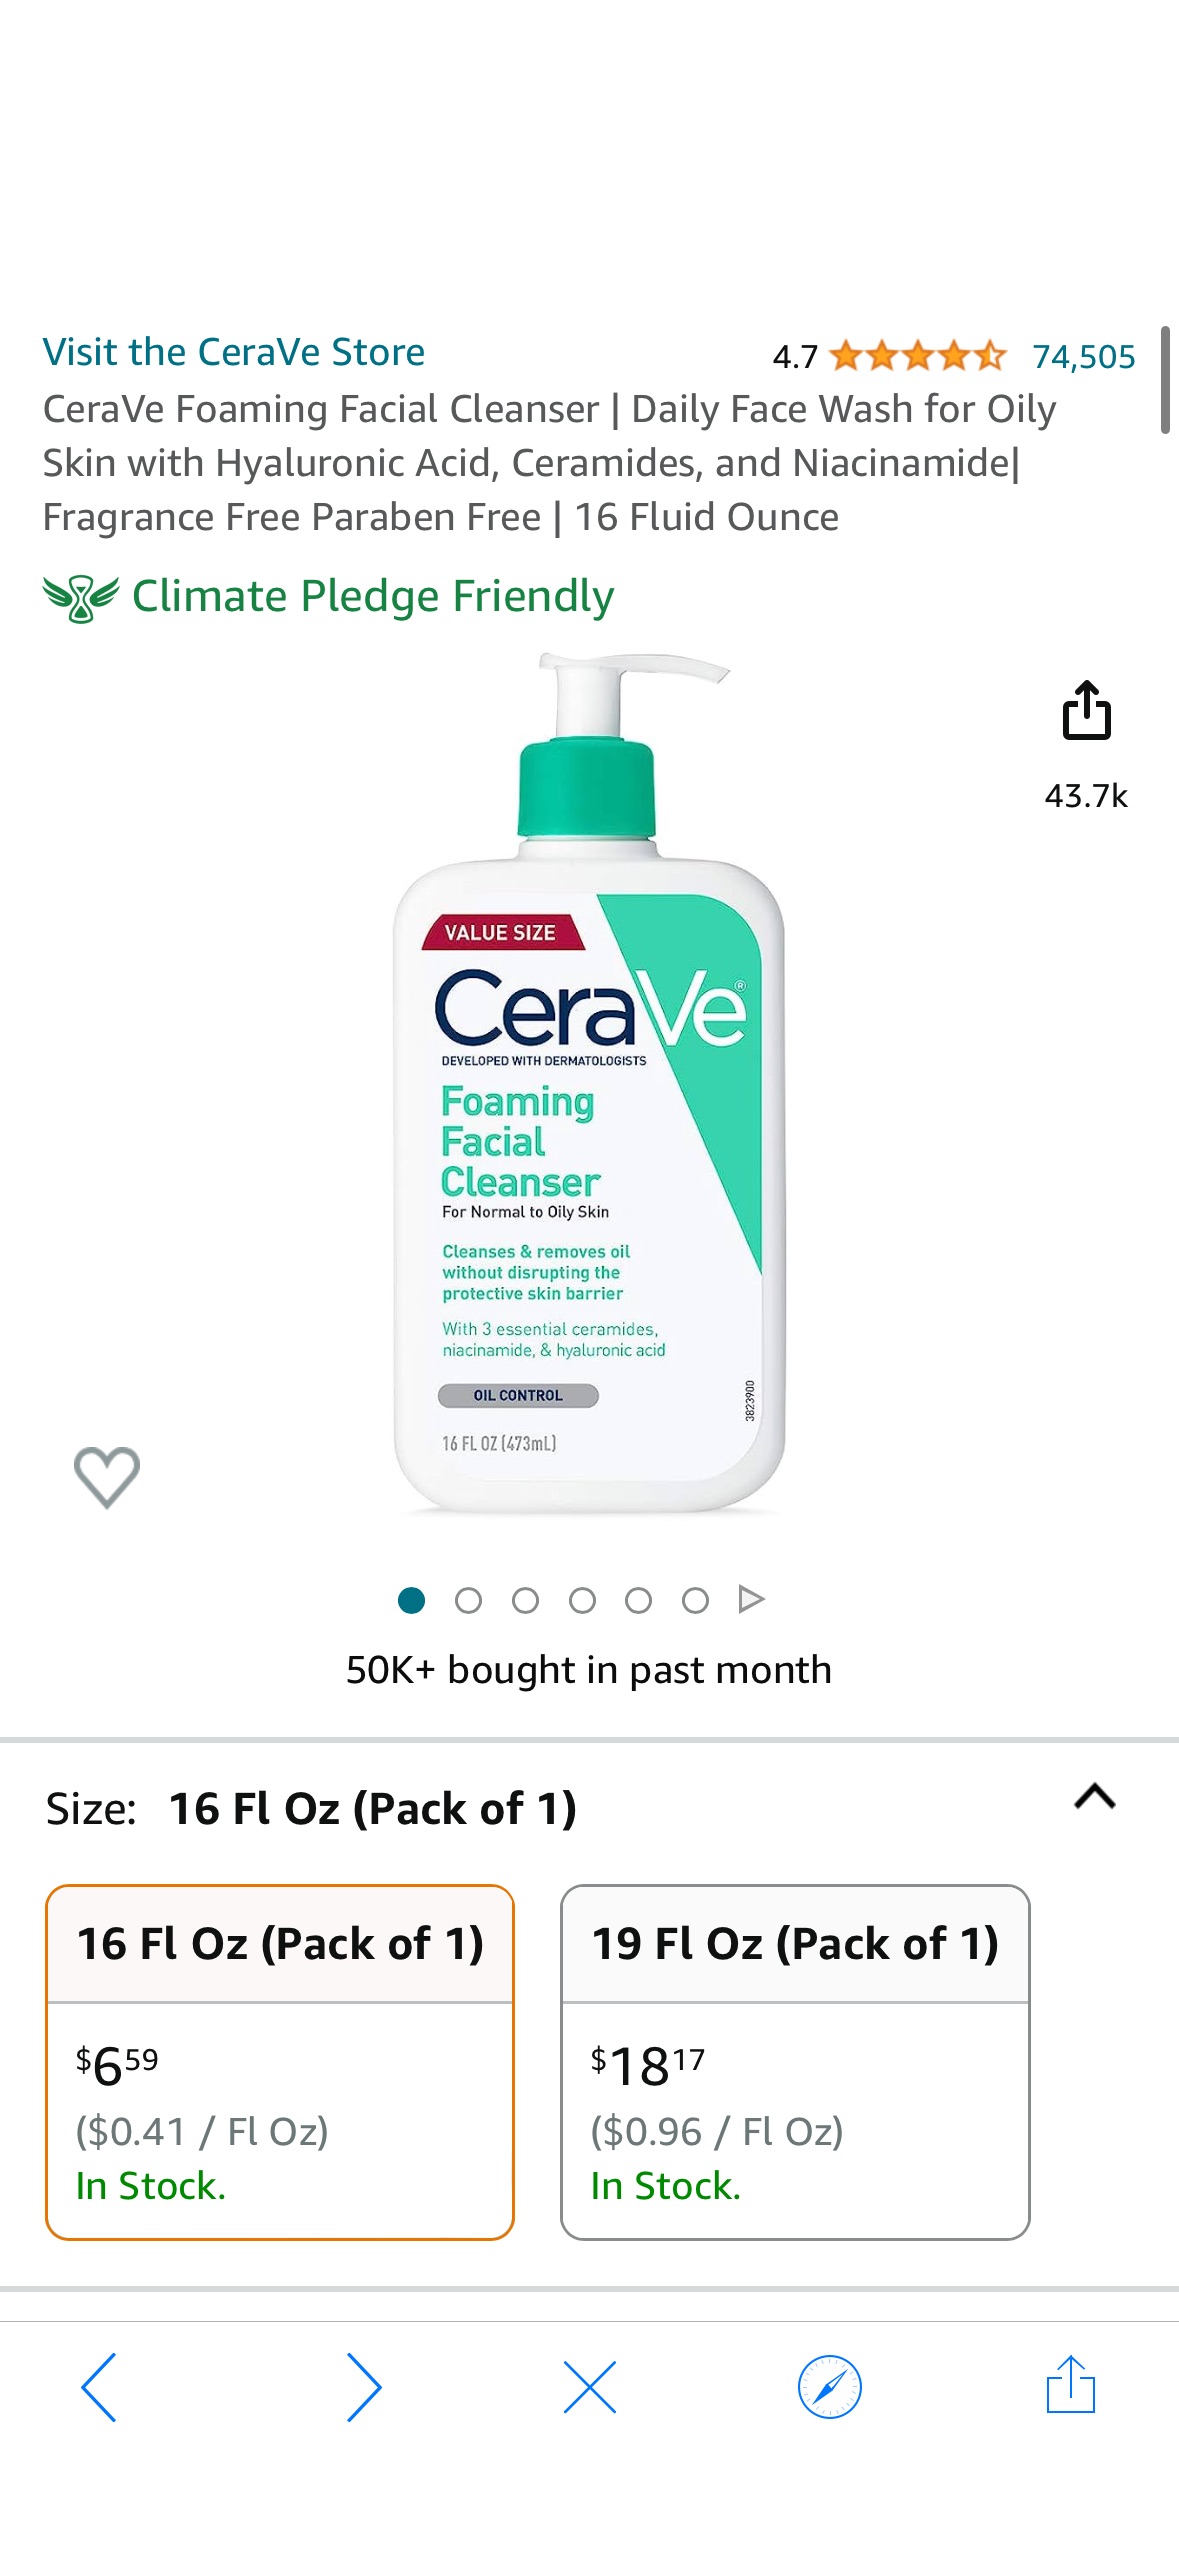 Amazon.com: CeraVe Foaming Facial Cleanser | Daily Face Wash for Oily Skin with Hyaluronic Acid, Ceramides, and Niacinamide| Fragrance Free Paraben Free | 16 Fluid Ounce :洗面奶